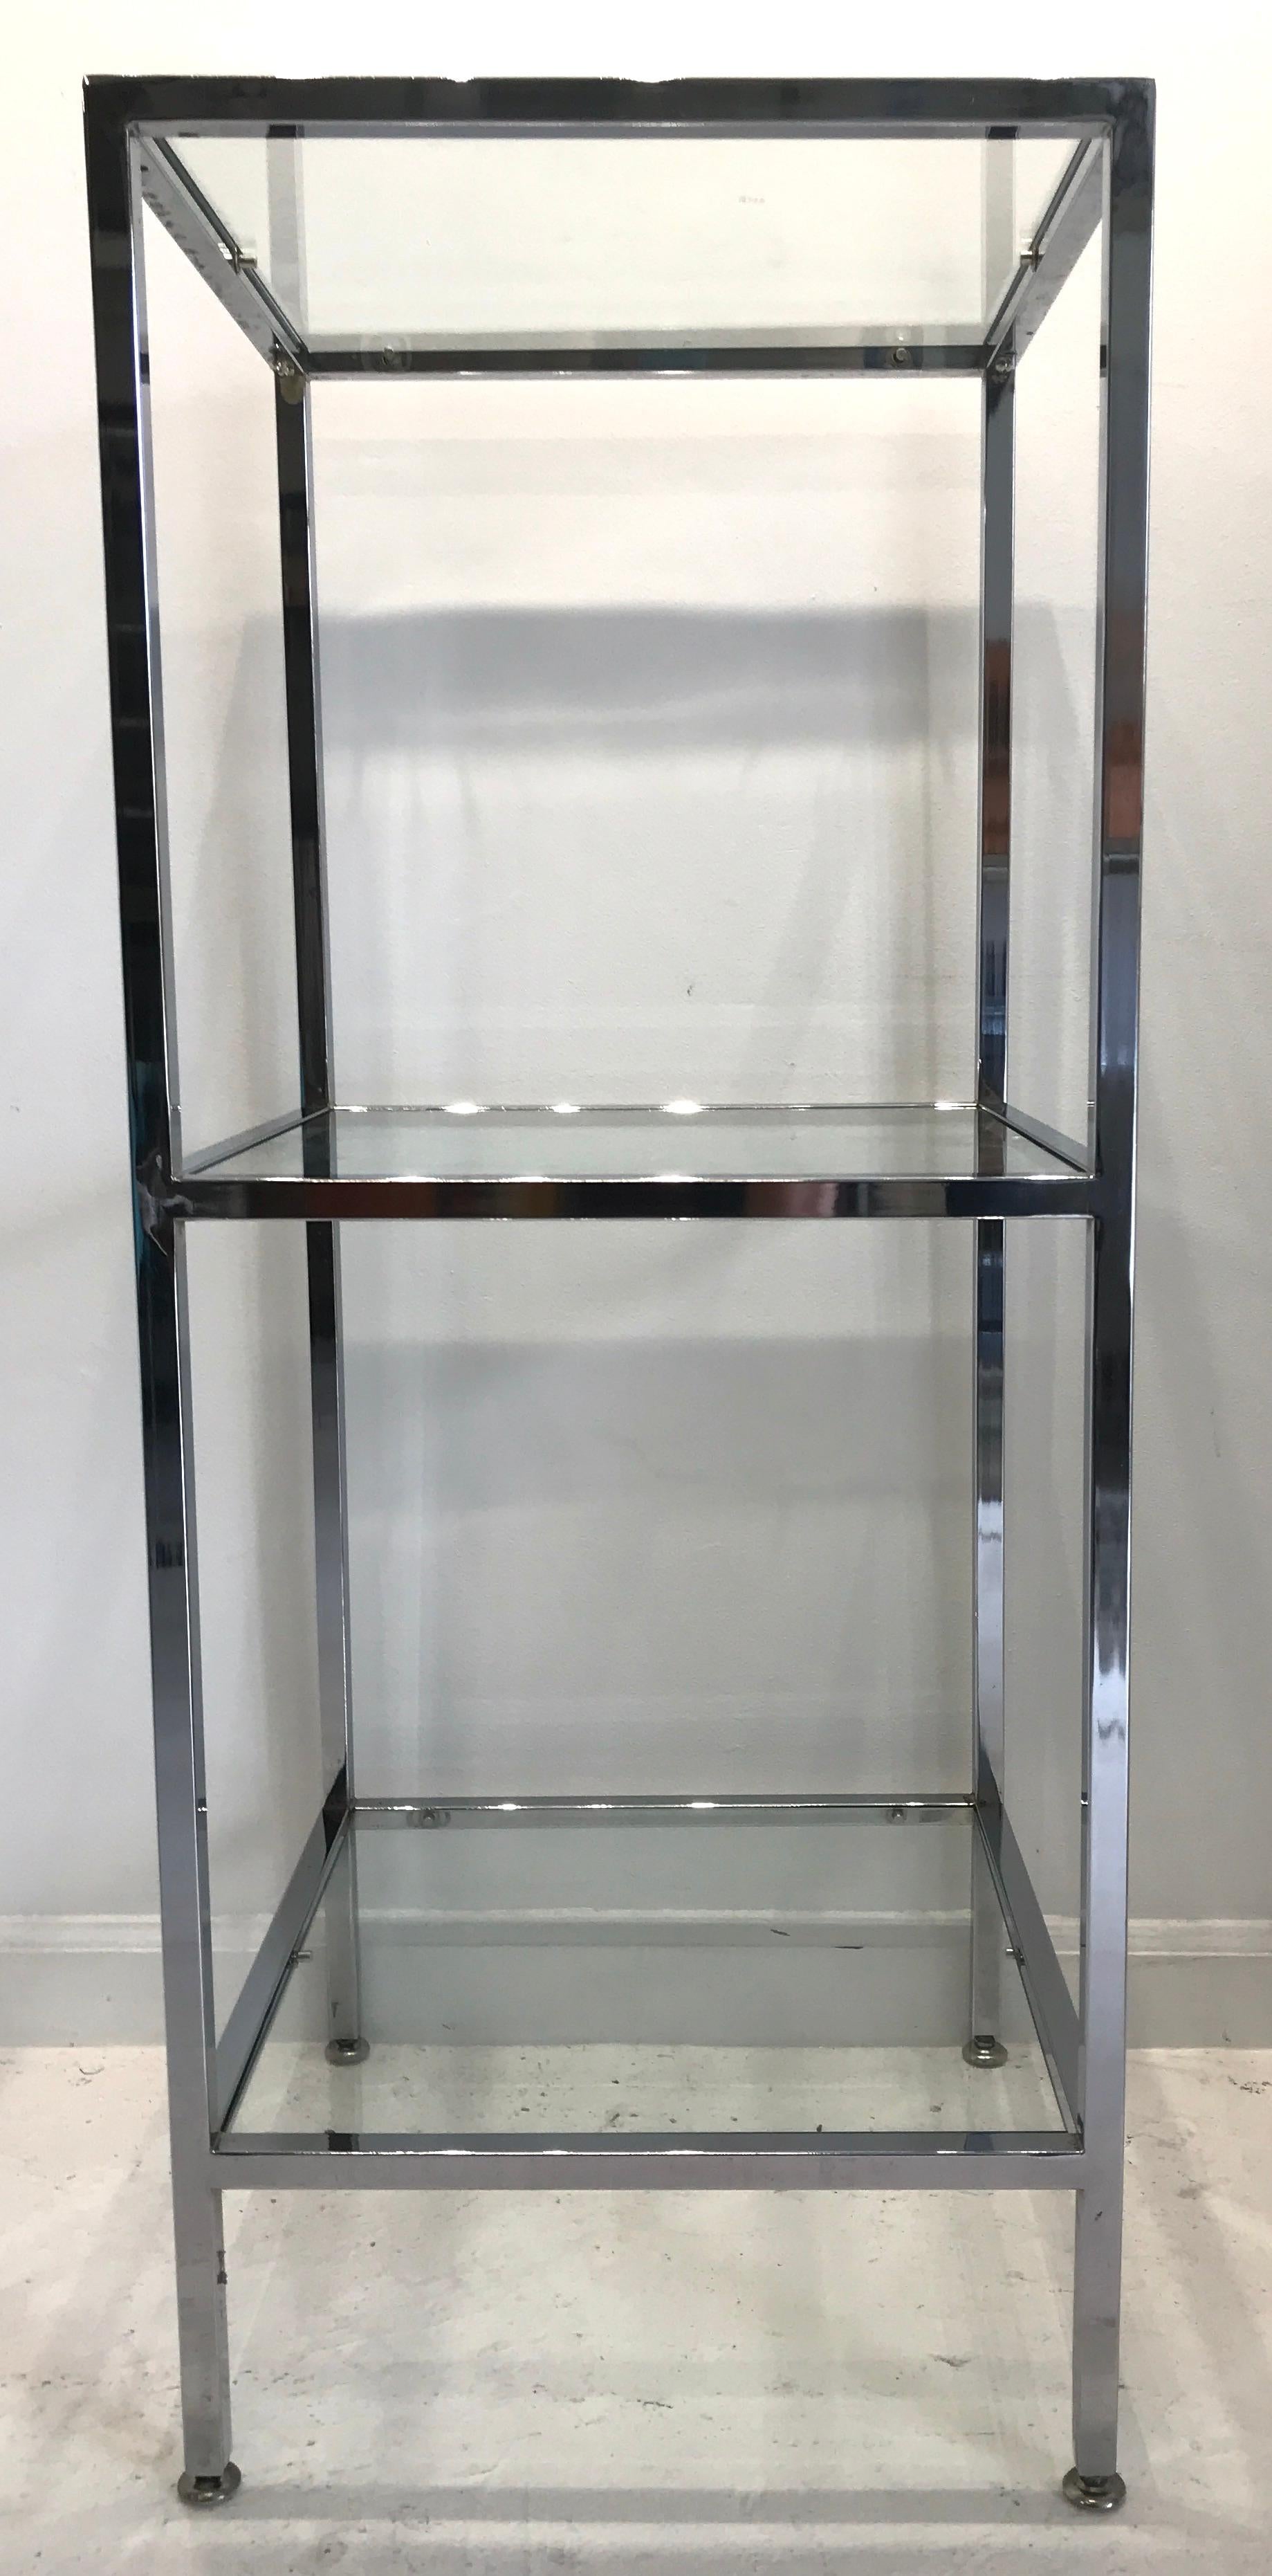 Milo Baughman style short chrome and glass column étagère, two available
Each one fitted with three 17 inch square clear glass shelves. Each cube shelf has a display height of 17.5